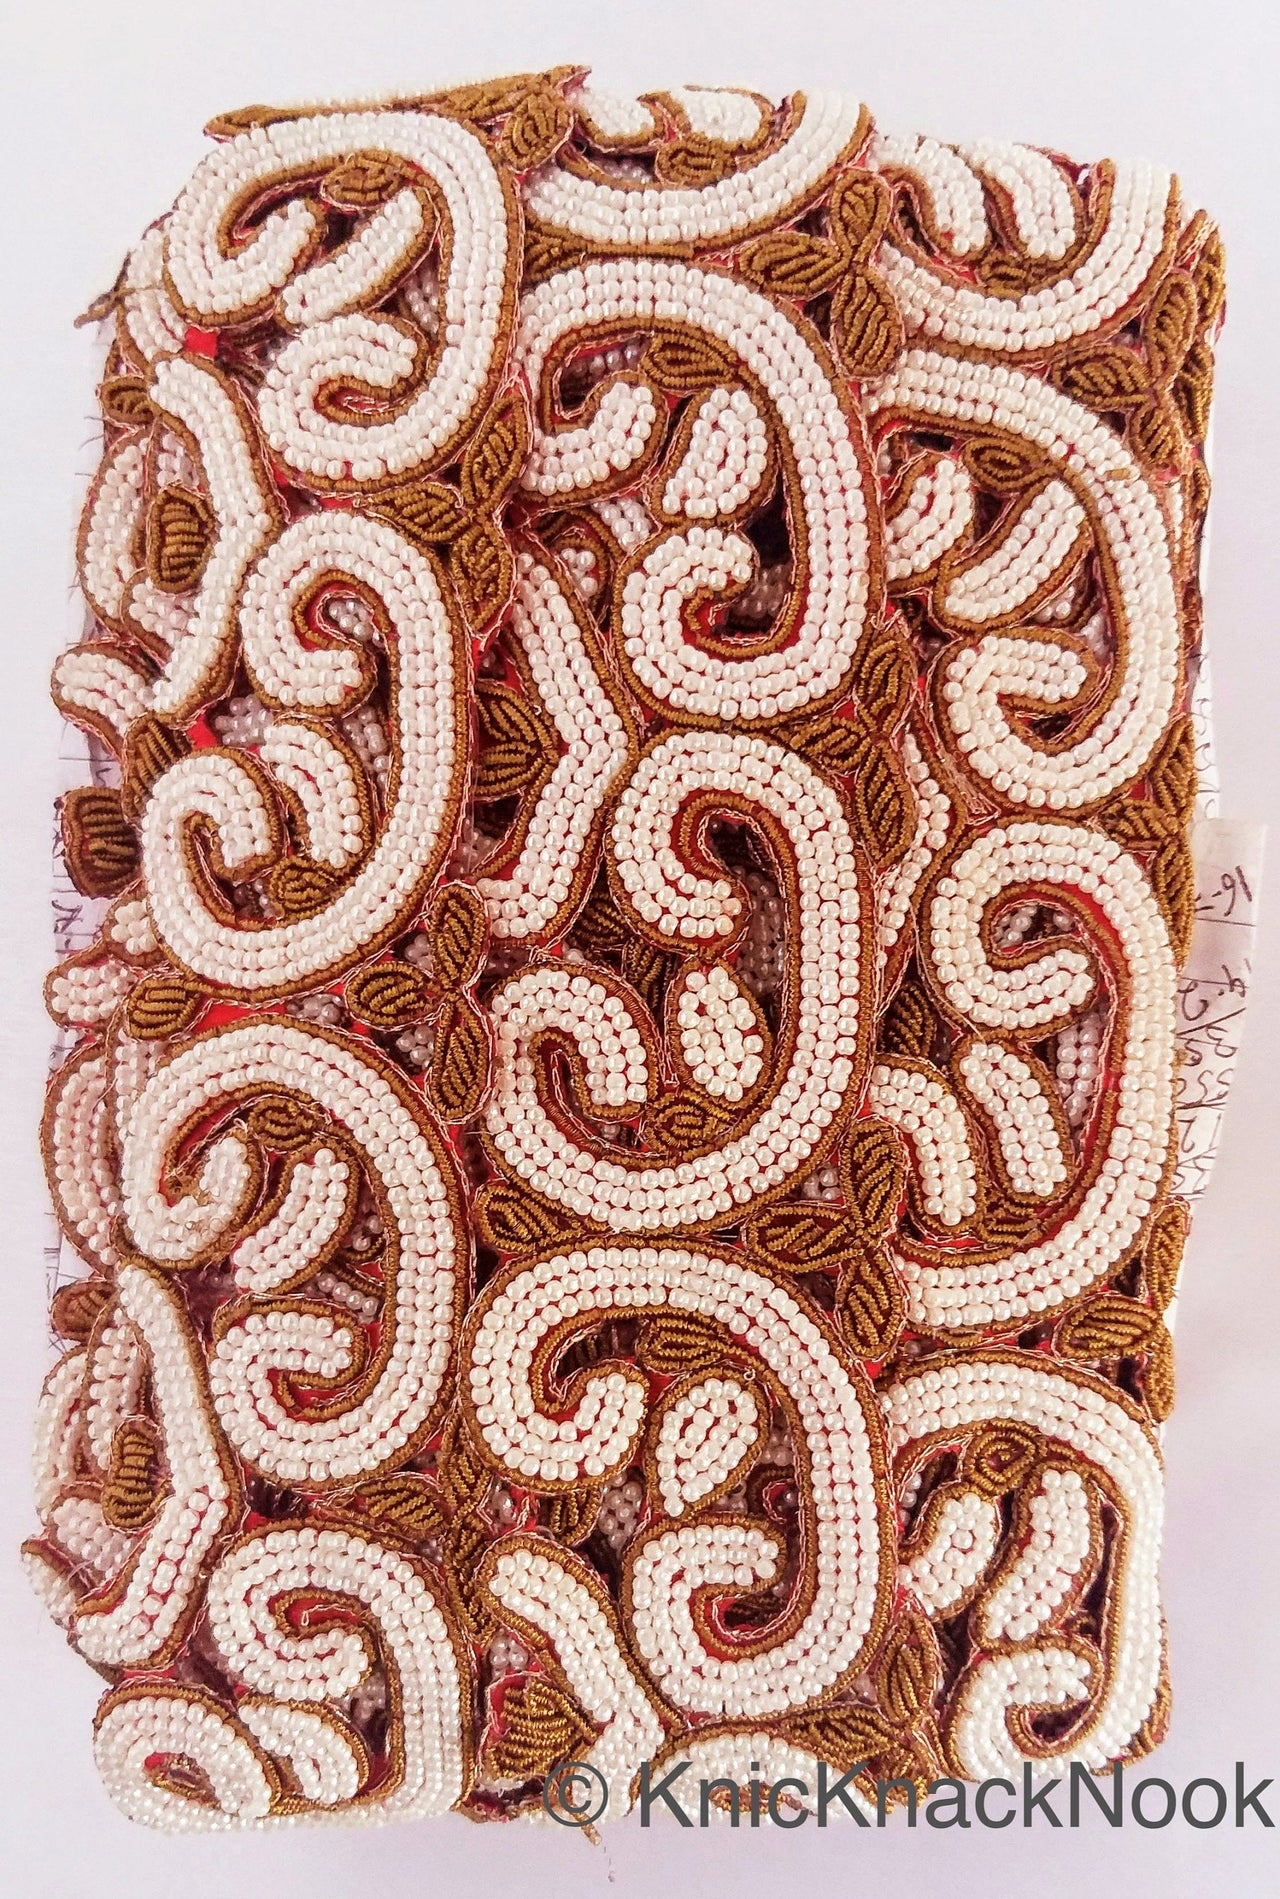 Gold Zardozi Hand Embroidered Cutwork Lace Trim Beaded with Ivory Seed Beads, Wedding  Trim, Indian Trim